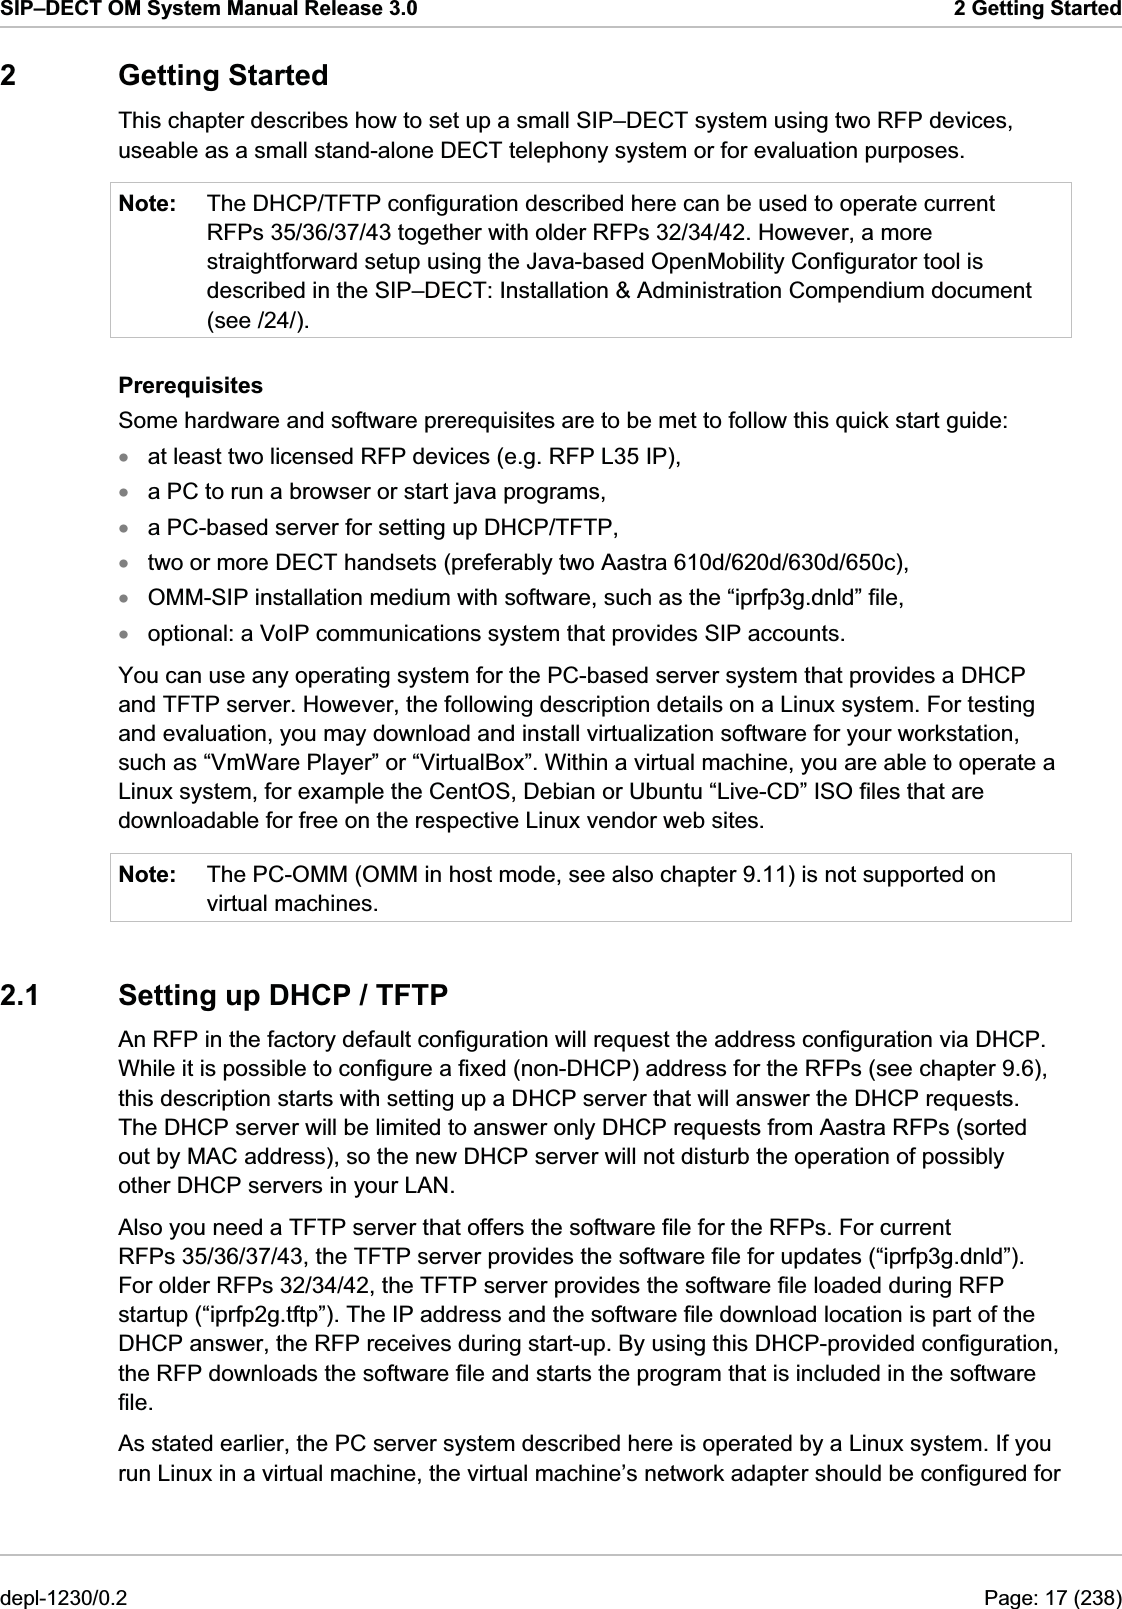 SIP–DECT OM System Manual Release 3.0  2 Getting Started 2 Getting Started This chapter describes how to set up a small SIP–DECT system using two RFP devices, useable as a small stand-alone DECT telephony system or for evaluation purposes.  Note:  The DHCP/TFTP configuration described here can be used to operate current RFPs 35/36/37/43 together with older RFPs 32/34/42. However, a more straightforward setup using the Java-based OpenMobility Configurator tool is described in the SIP–DECT: Installation &amp; Administration Compendium document (see /24/). Prerequisites Some hardware and software prerequisites are to be met to follow this quick start guide: xxxxxxNote: at least two licensed RFP devices (e.g. RFP L35 IP), a PC to run a browser or start java programs, a PC-based server for setting up DHCP/TFTP, two or more DECT handsets (preferably two Aastra 610d/620d/630d/650c), OMM-SIP installation medium with software, such as the “iprfp3g.dnld” file, optional: a VoIP communications system that provides SIP accounts. You can use any operating system for the PC-based server system that provides a DHCP and TFTP server. However, the following description details on a Linux system. For testing and evaluation, you may download and install virtualization software for your workstation, such as “VmWare Player” or “VirtualBox”. Within a virtual machine, you are able to operate a Linux system, for example the CentOS, Debian or Ubuntu “Live-CD” ISO files that are downloadable for free on the respective Linux vendor web sites. The PC-OMM (OMM in host mode, see also chapter 9.11) is not supported on virtual machines. 2.1  Setting up DHCP / TFTP An RFP in the factory default configuration will request the address configuration via DHCP. While it is possible to configure a fixed (non-DHCP) address for the RFPs (see chapter 9.6), this description starts with setting up a DHCP server that will answer the DHCP requests. The DHCP server will be limited to answer only DHCP requests from Aastra RFPs (sorted out by MAC address), so the new DHCP server will not disturb the operation of possibly other DHCP servers in your LAN. Also you need a TFTP server that offers the software file for the RFPs. For current RFPs 35/36/37/43, the TFTP server provides the software file for updates (“iprfp3g.dnld”). For older RFPs 32/34/42, the TFTP server provides the software file loaded during RFP startup (“iprfp2g.tftp”). The IP address and the software file download location is part of the DHCP answer, the RFP receives during start-up. By using this DHCP-provided configuration, the RFP downloads the software file and starts the program that is included in the software file. As stated earlier, the PC server system described here is operated by a Linux system. If you run Linux in a virtual machine, the virtual machine’s network adapter should be configured for depl-1230/0.2  Page: 17 (238) 